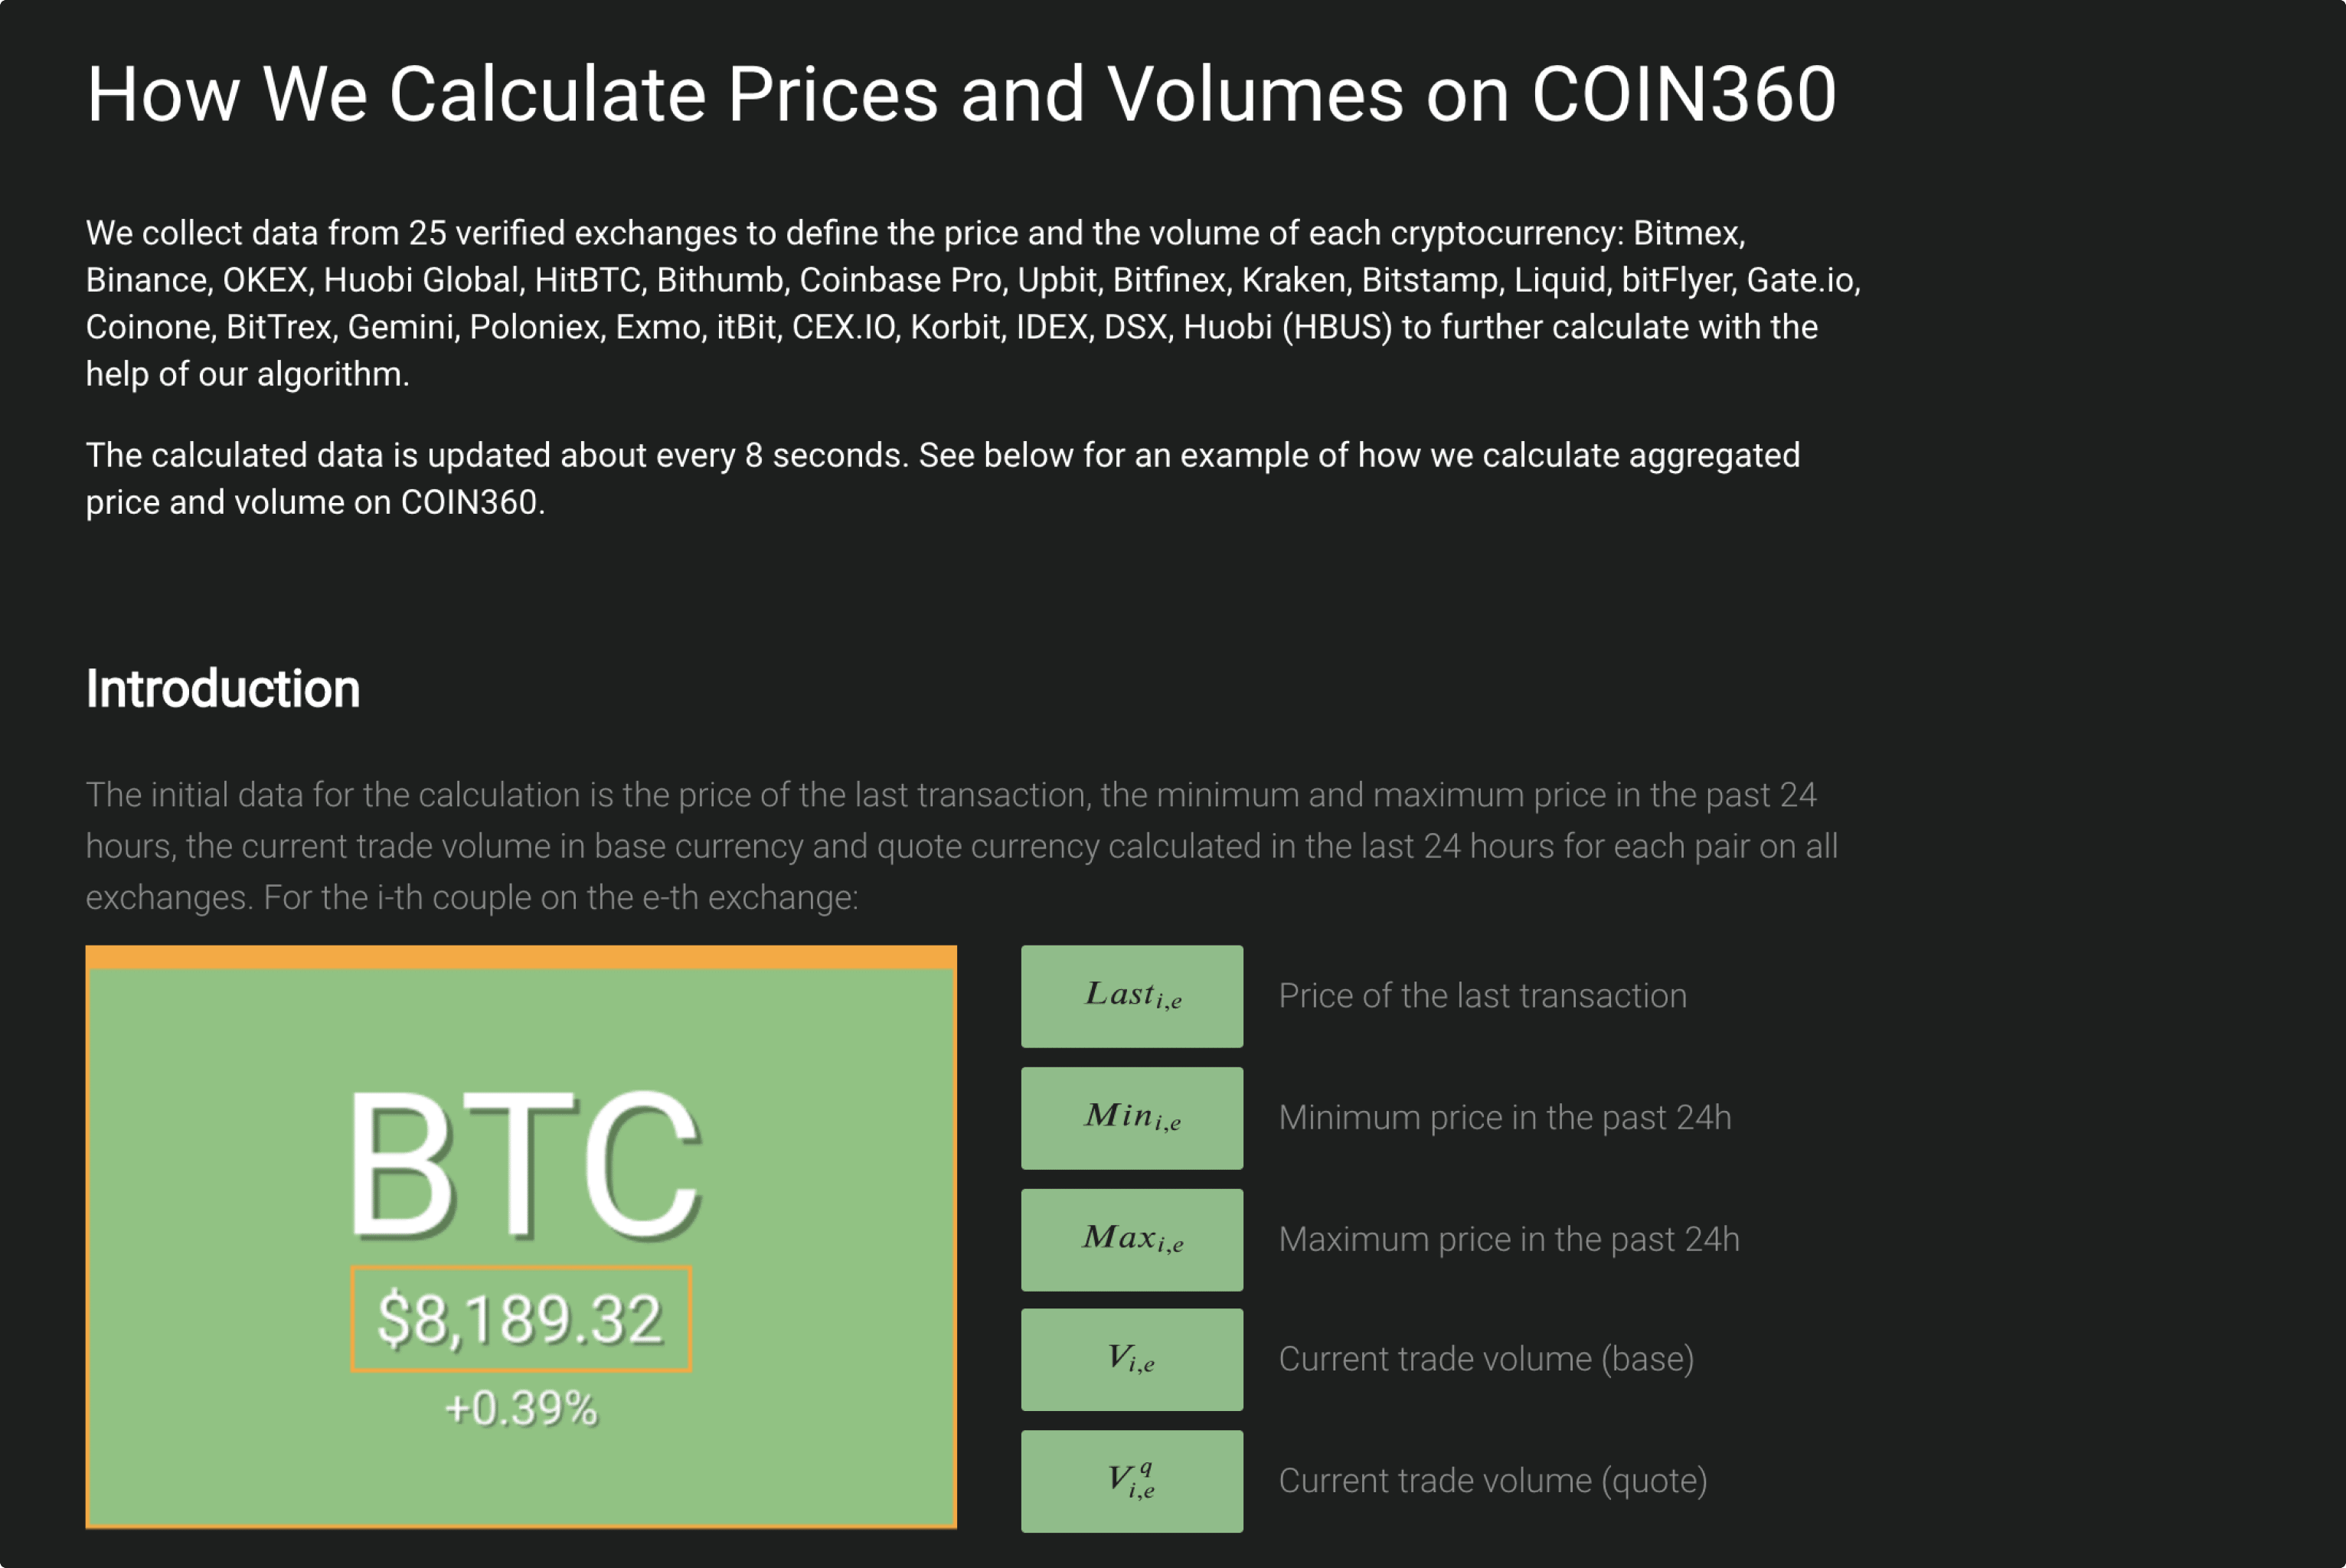 How coin360 calculate cryptocurrency price & volume